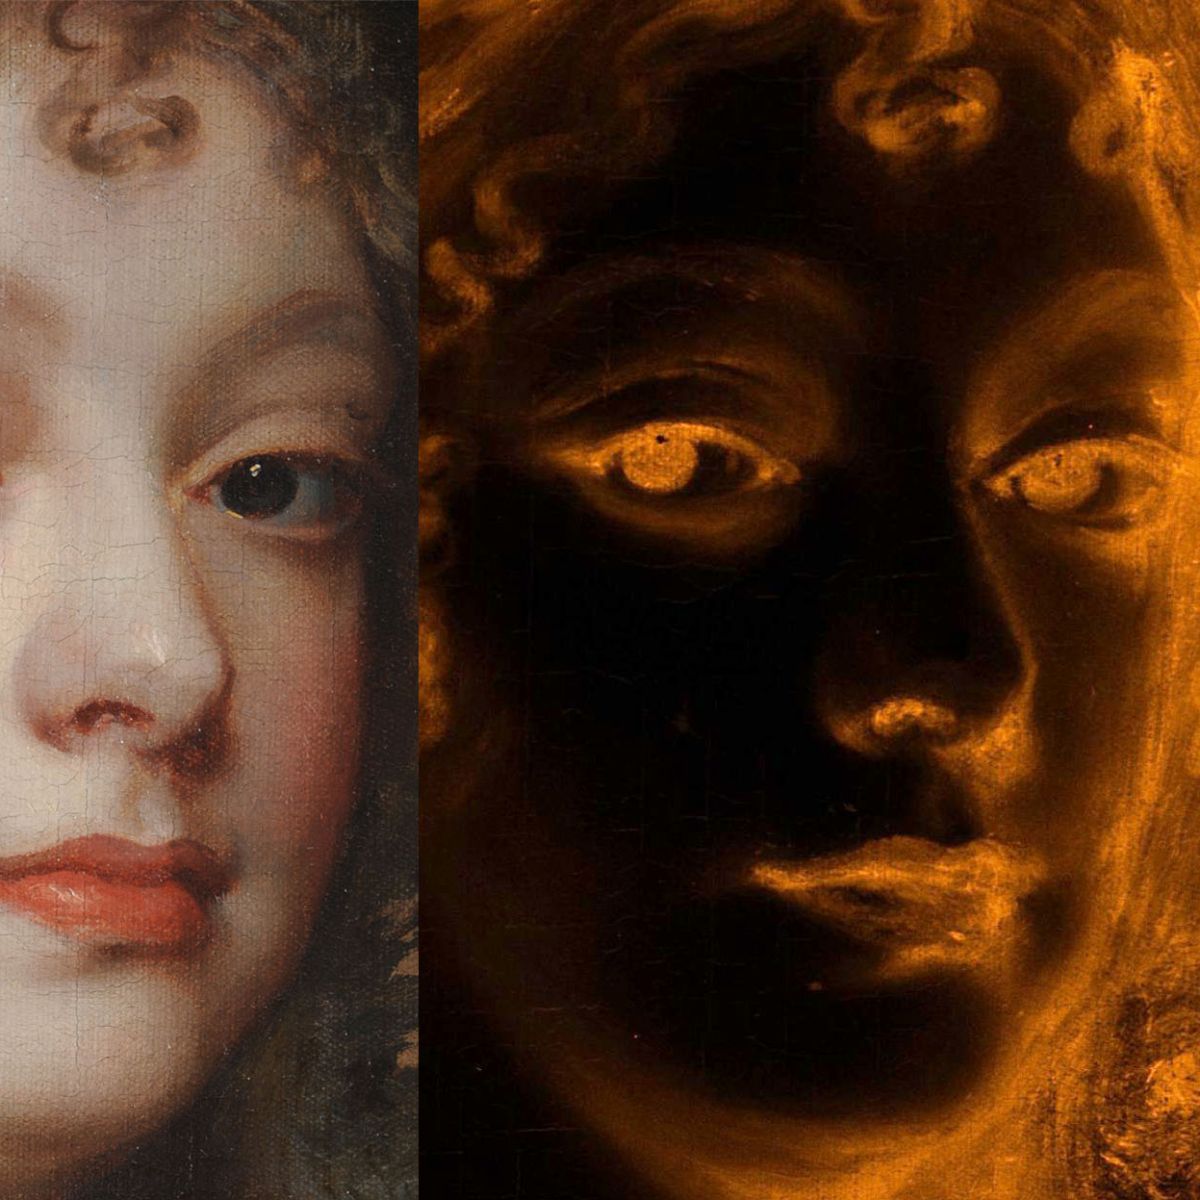 Painting of a face and an x-ray of the painting